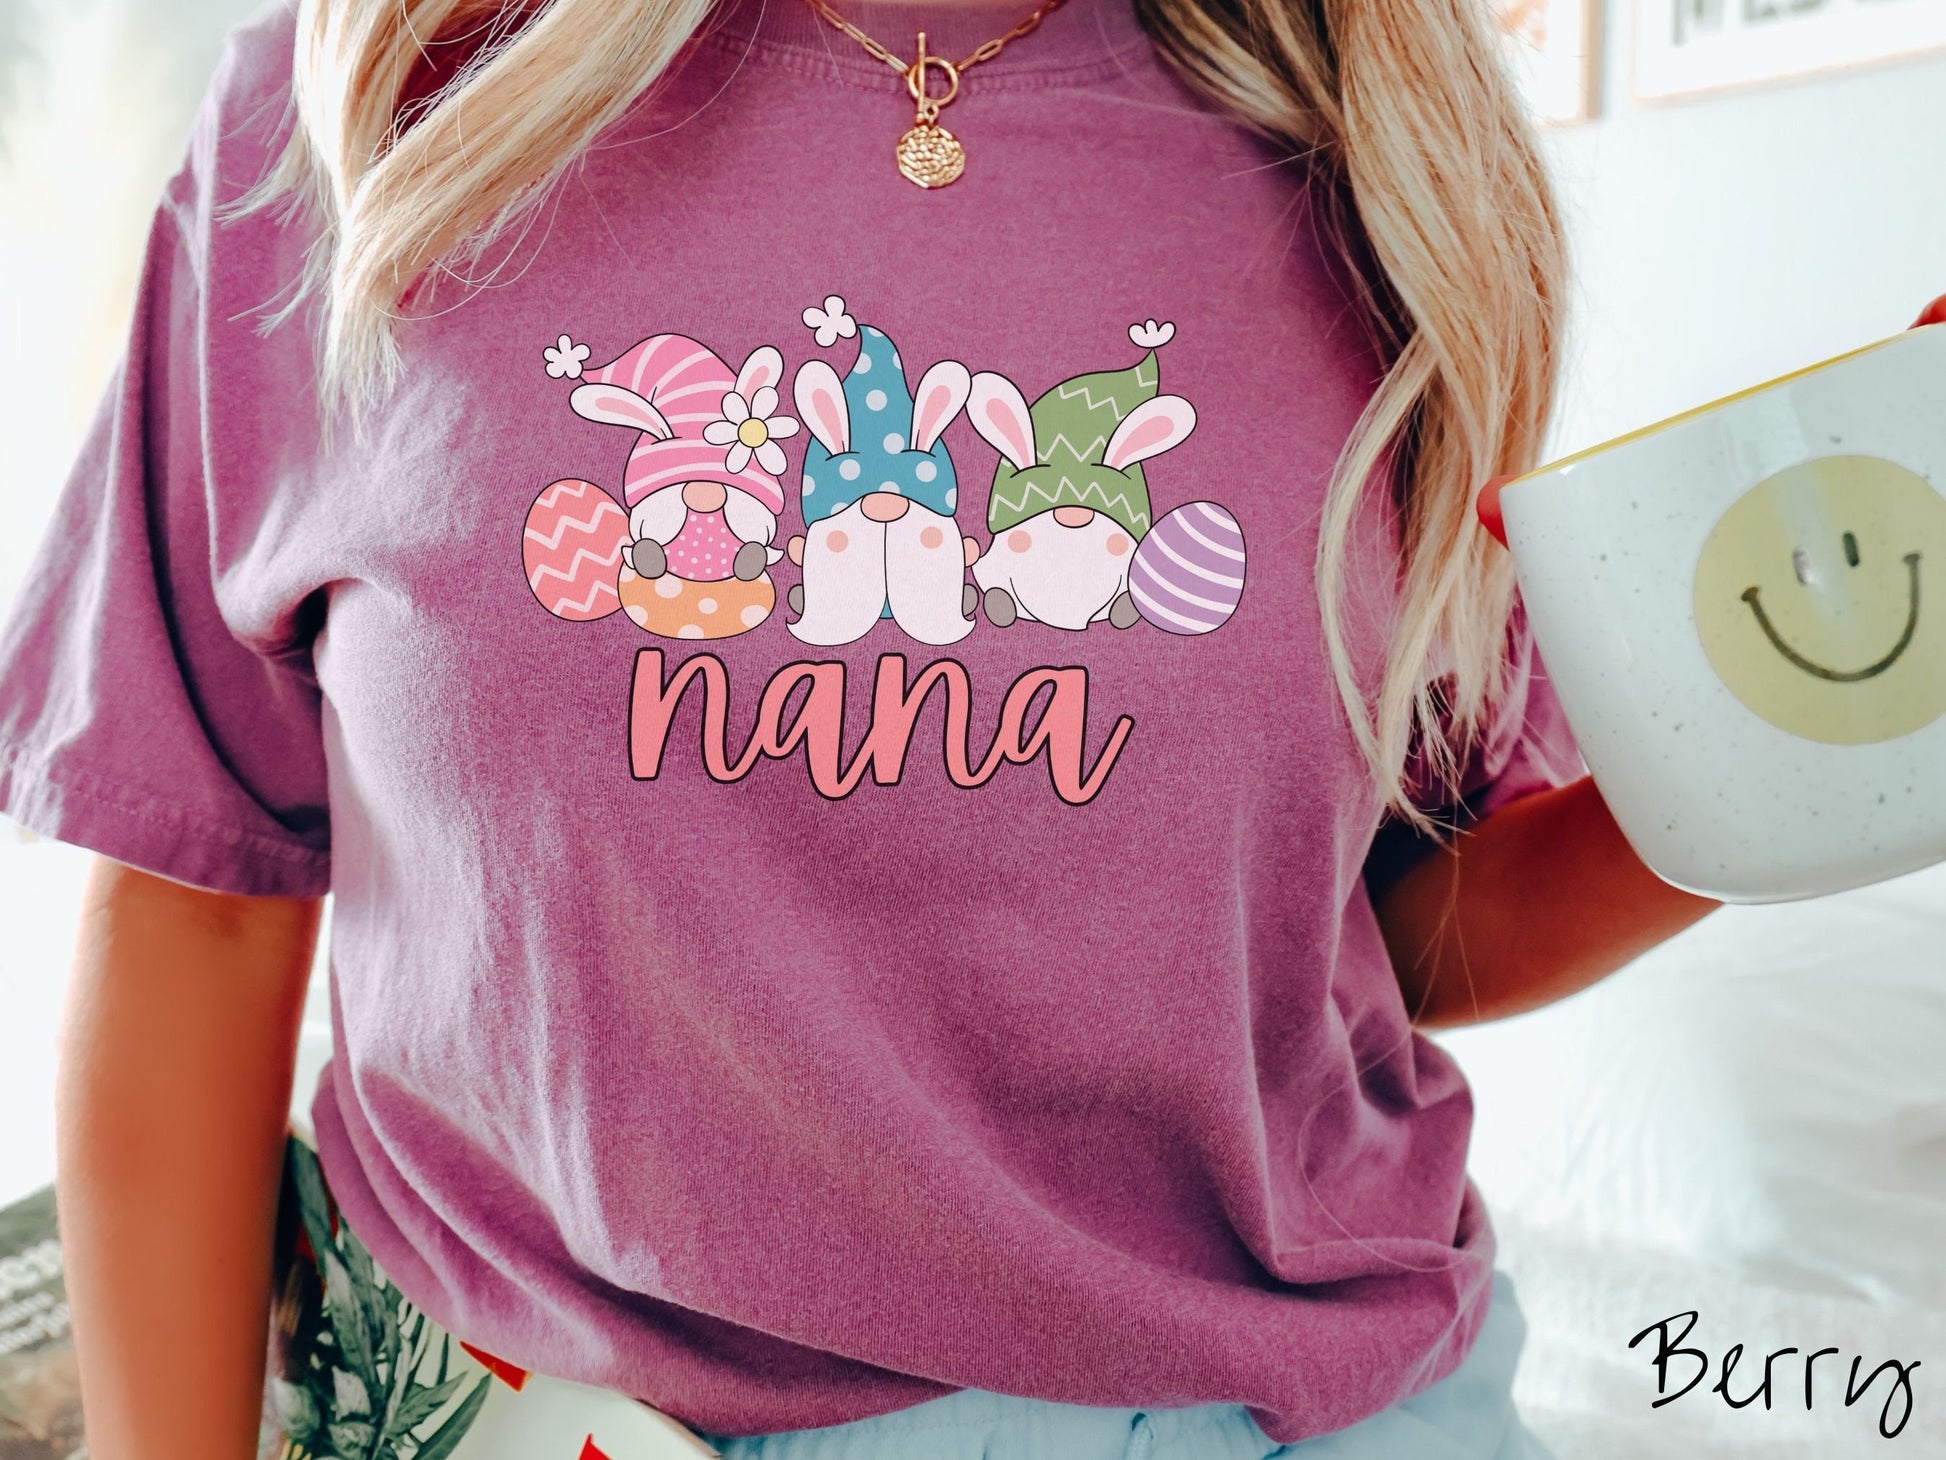 A woman wearing a cute, vintage berry colored shirt with text Nana below three gnomes with rabbit ears sitting next to each other. The left one is wearing pink, the middle blue, and right in green, with colorful easter eggs scattered about.